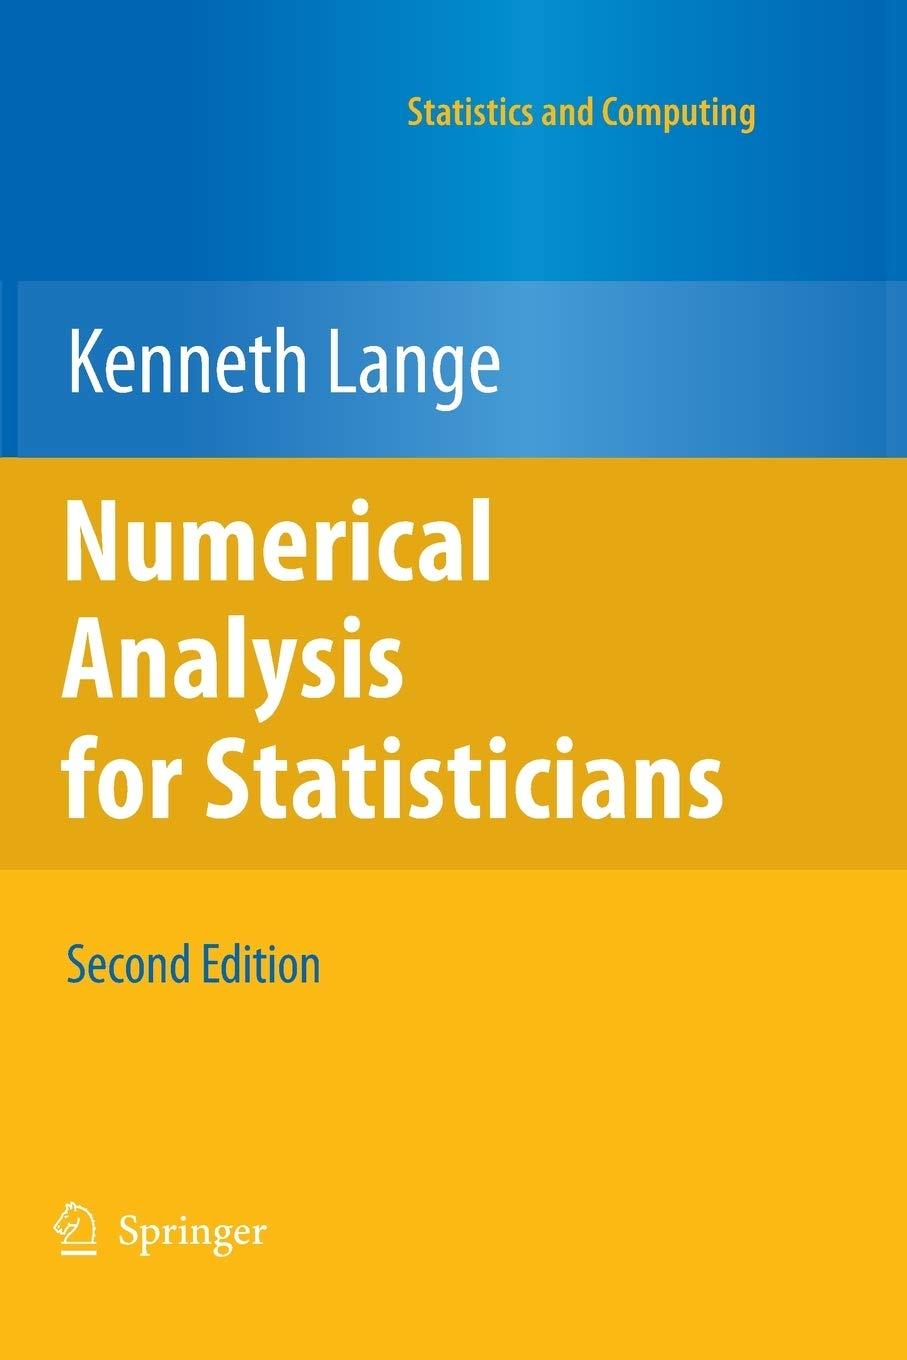 numerical analysis for statisticians 2nd edition kenneth lange 146142612x, 9781461426127